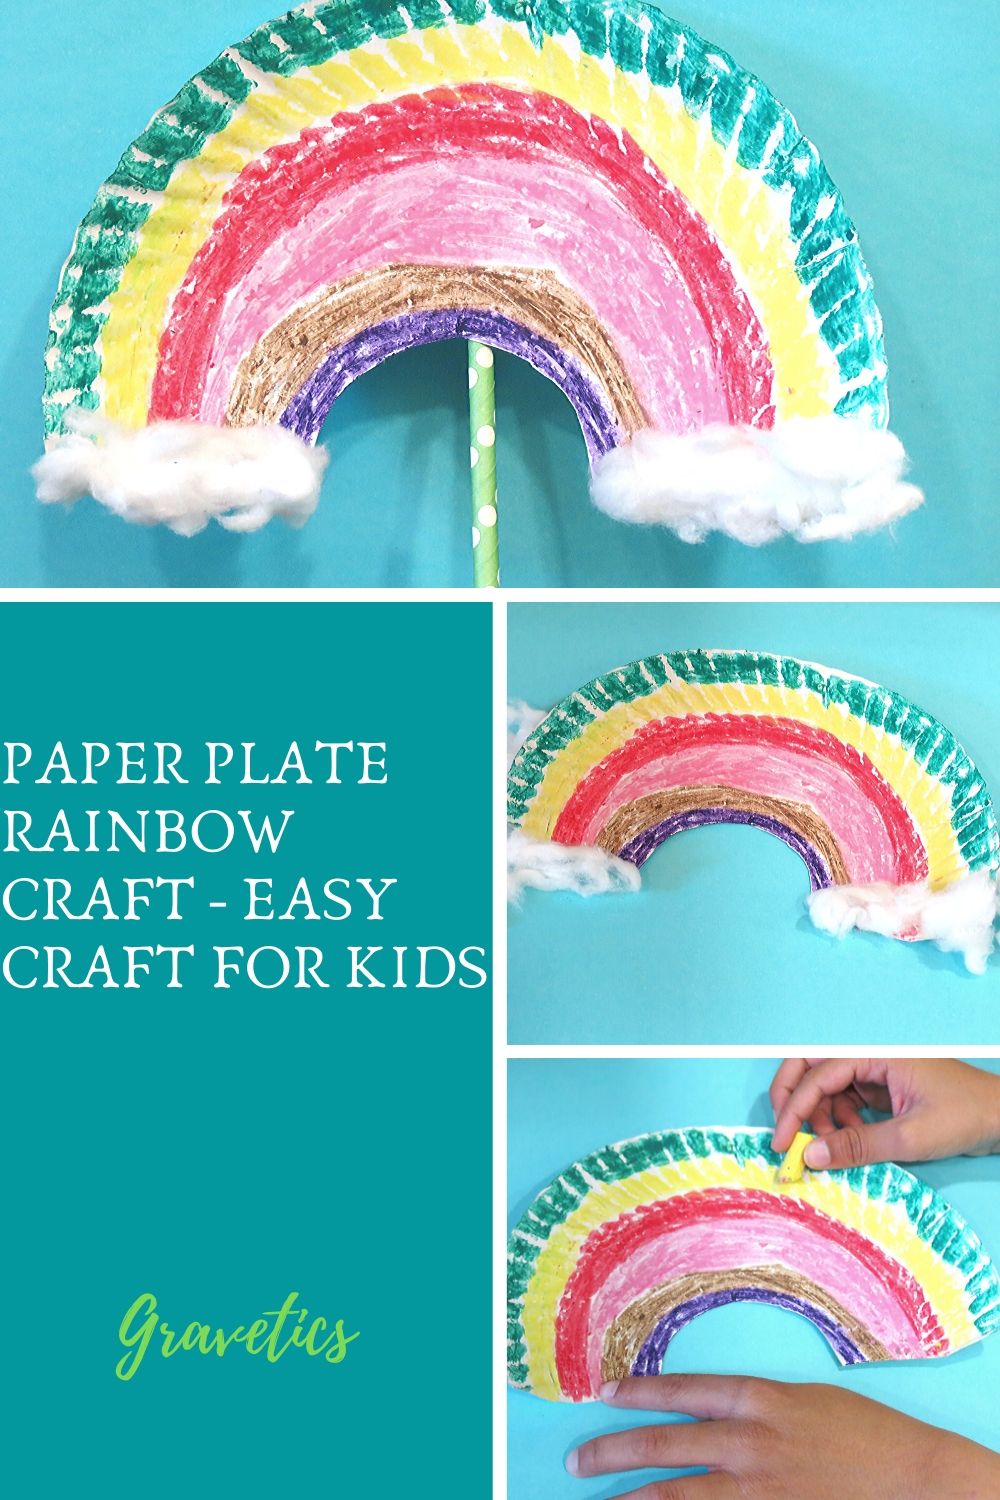 Paper Plate Rainbow Craft - Easy Craft for Kids